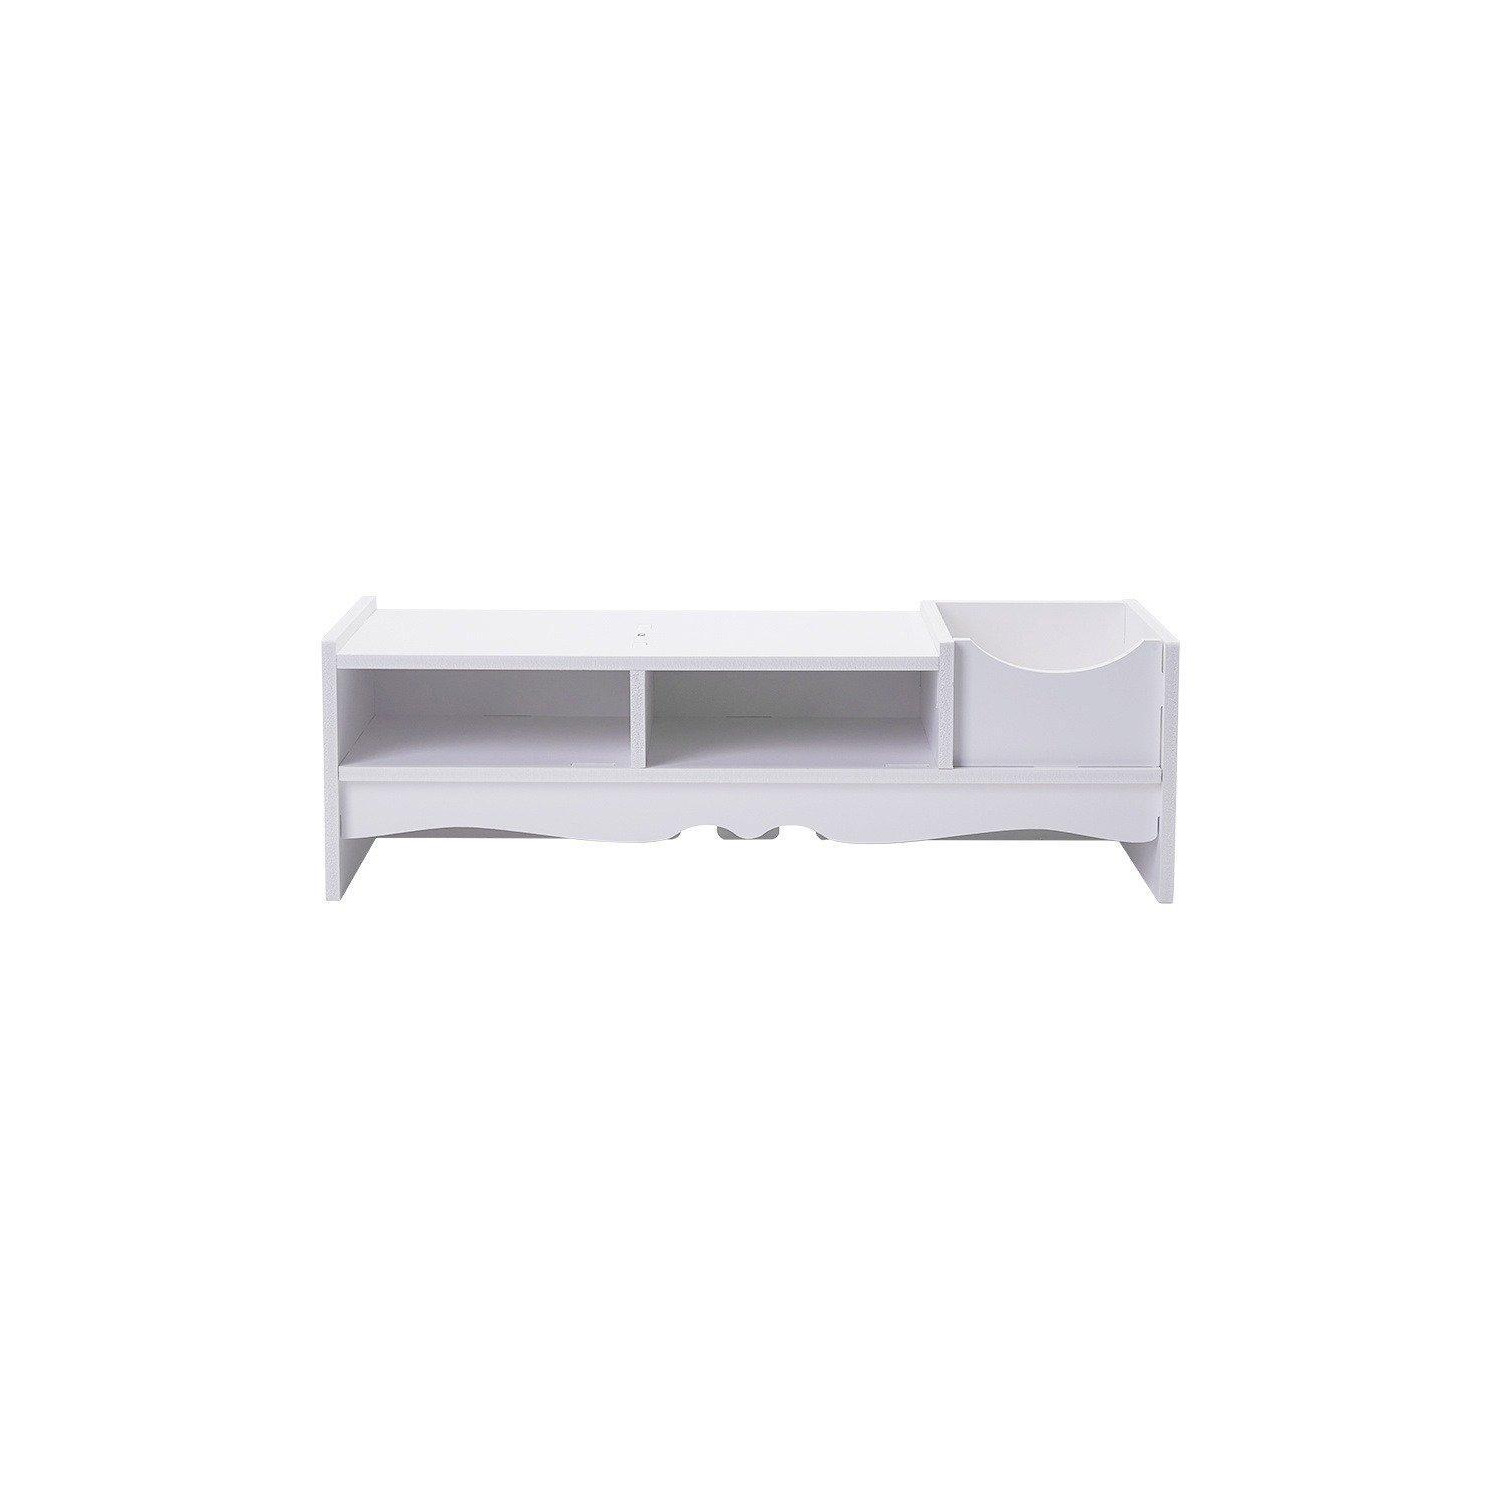 Office Multifunctional Monitor Stand Riser with Storage - image 1